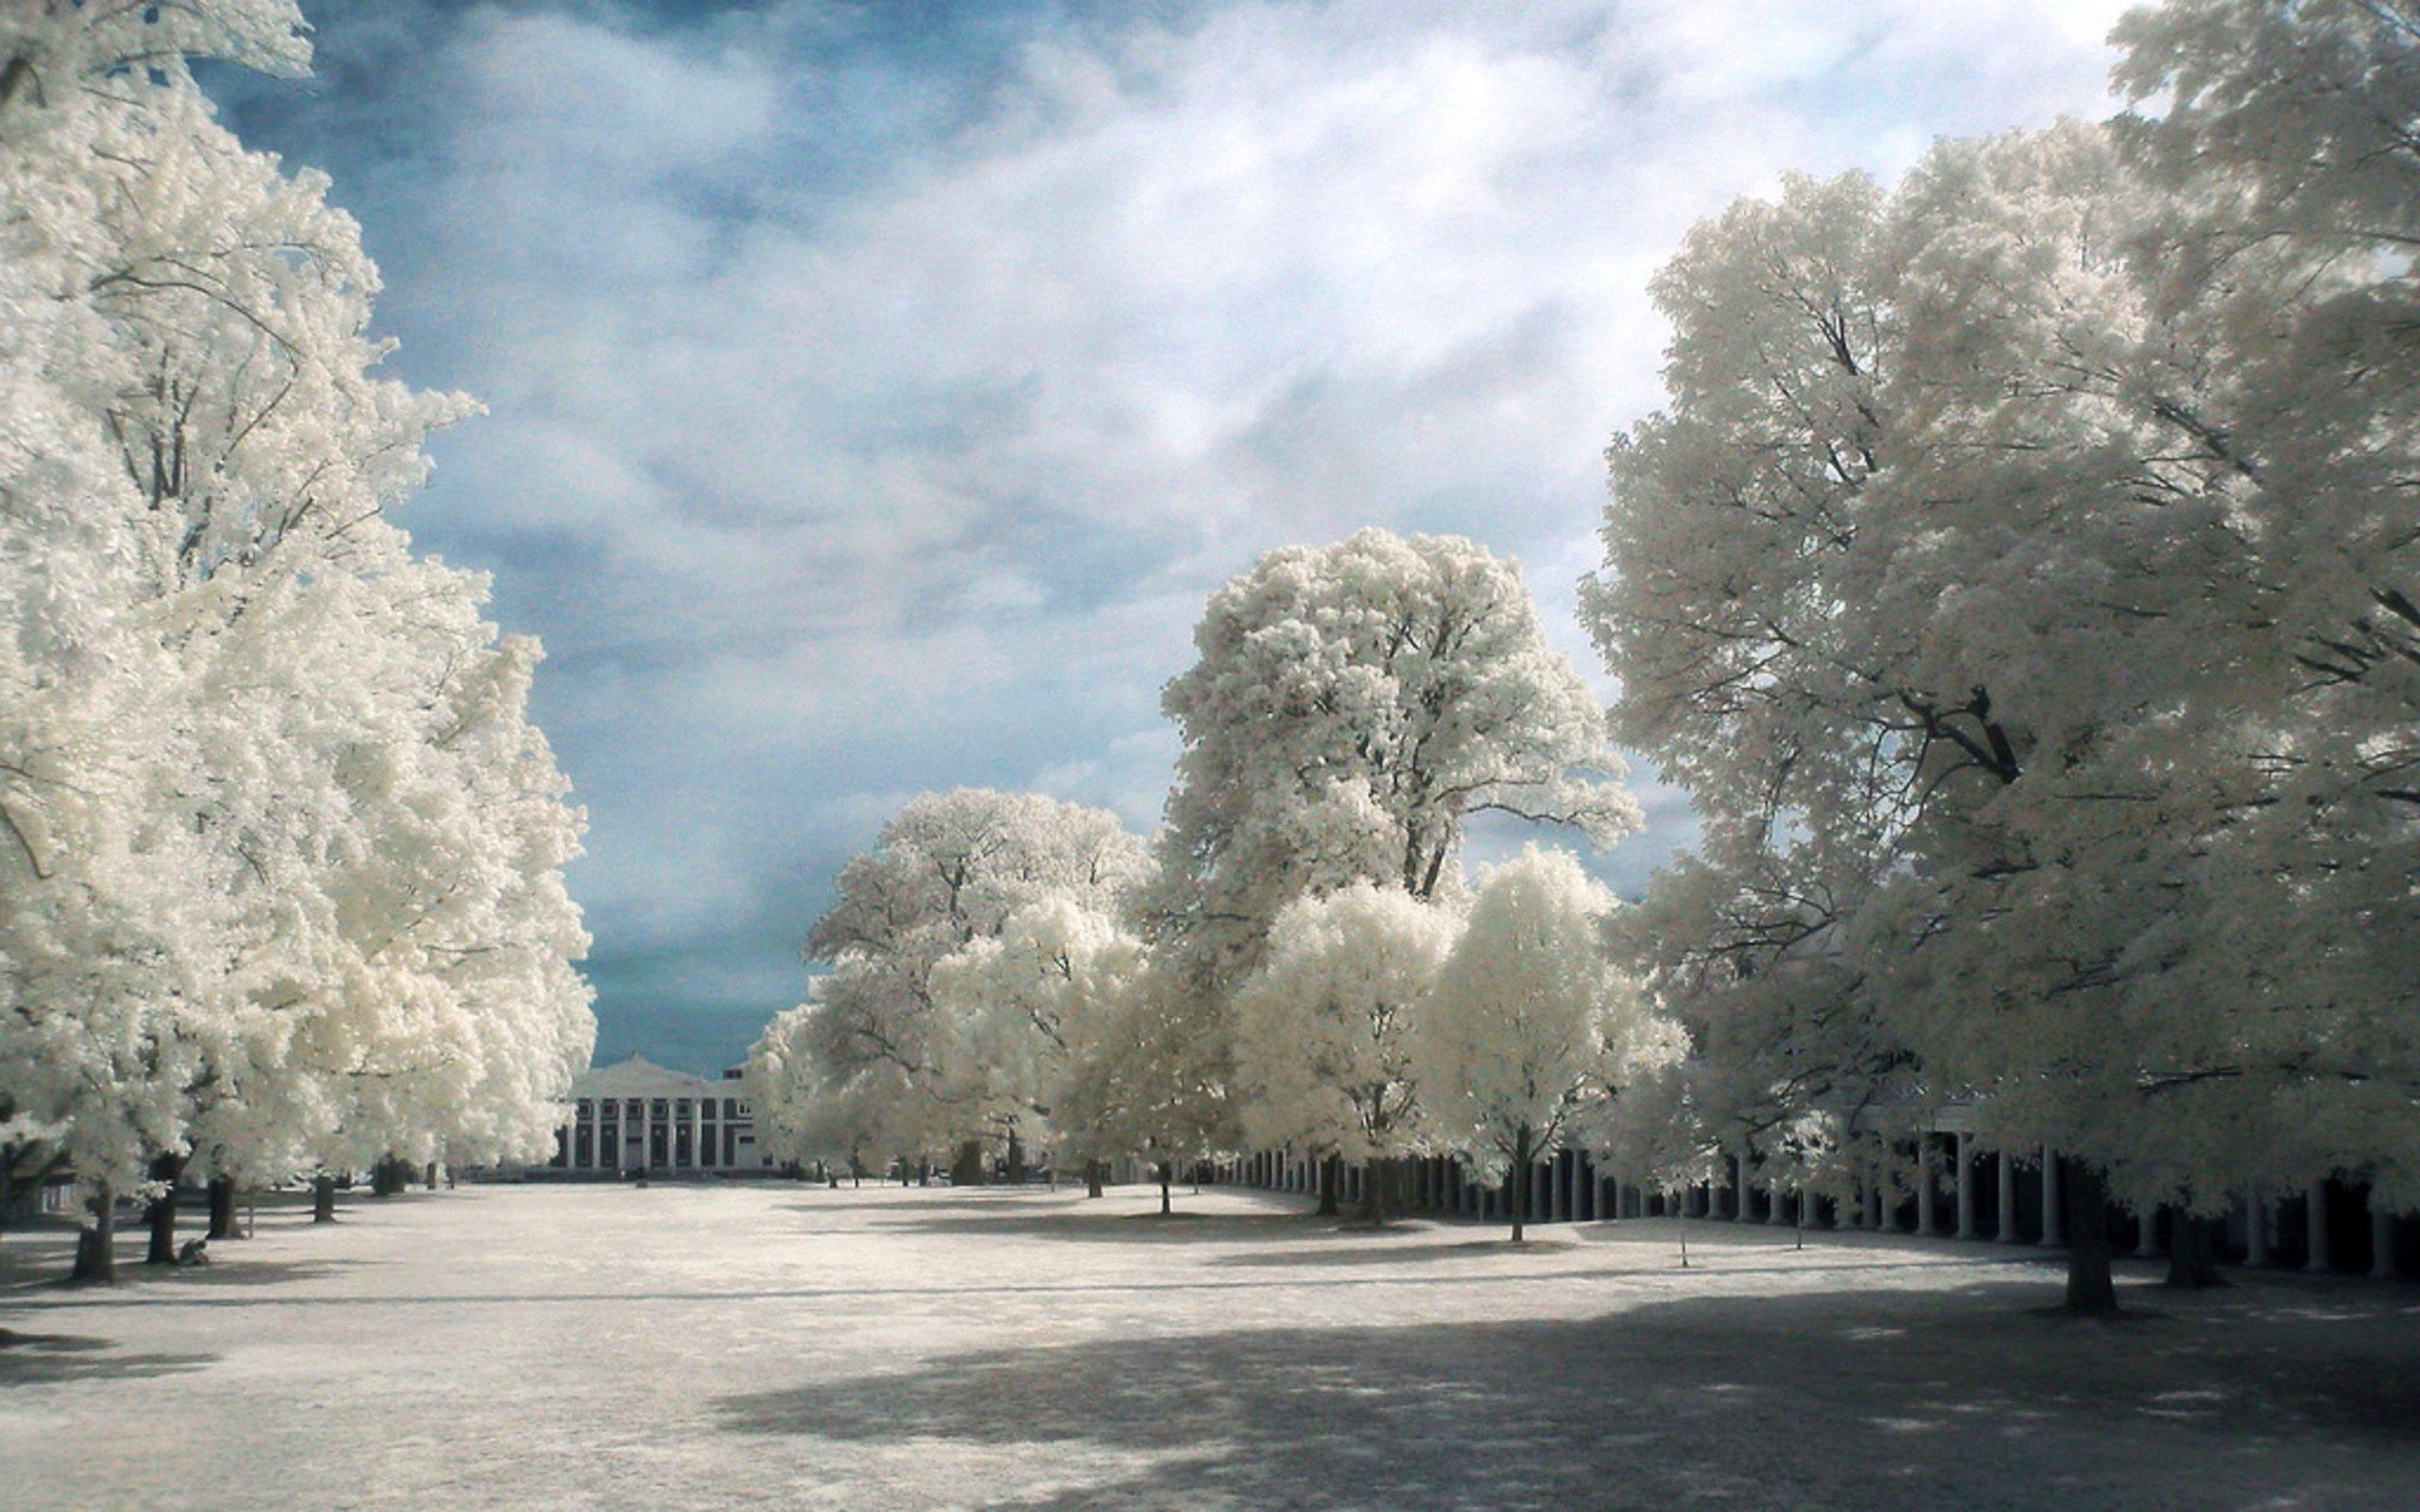 Infrared Photography central city park HD Wallpaper. Background